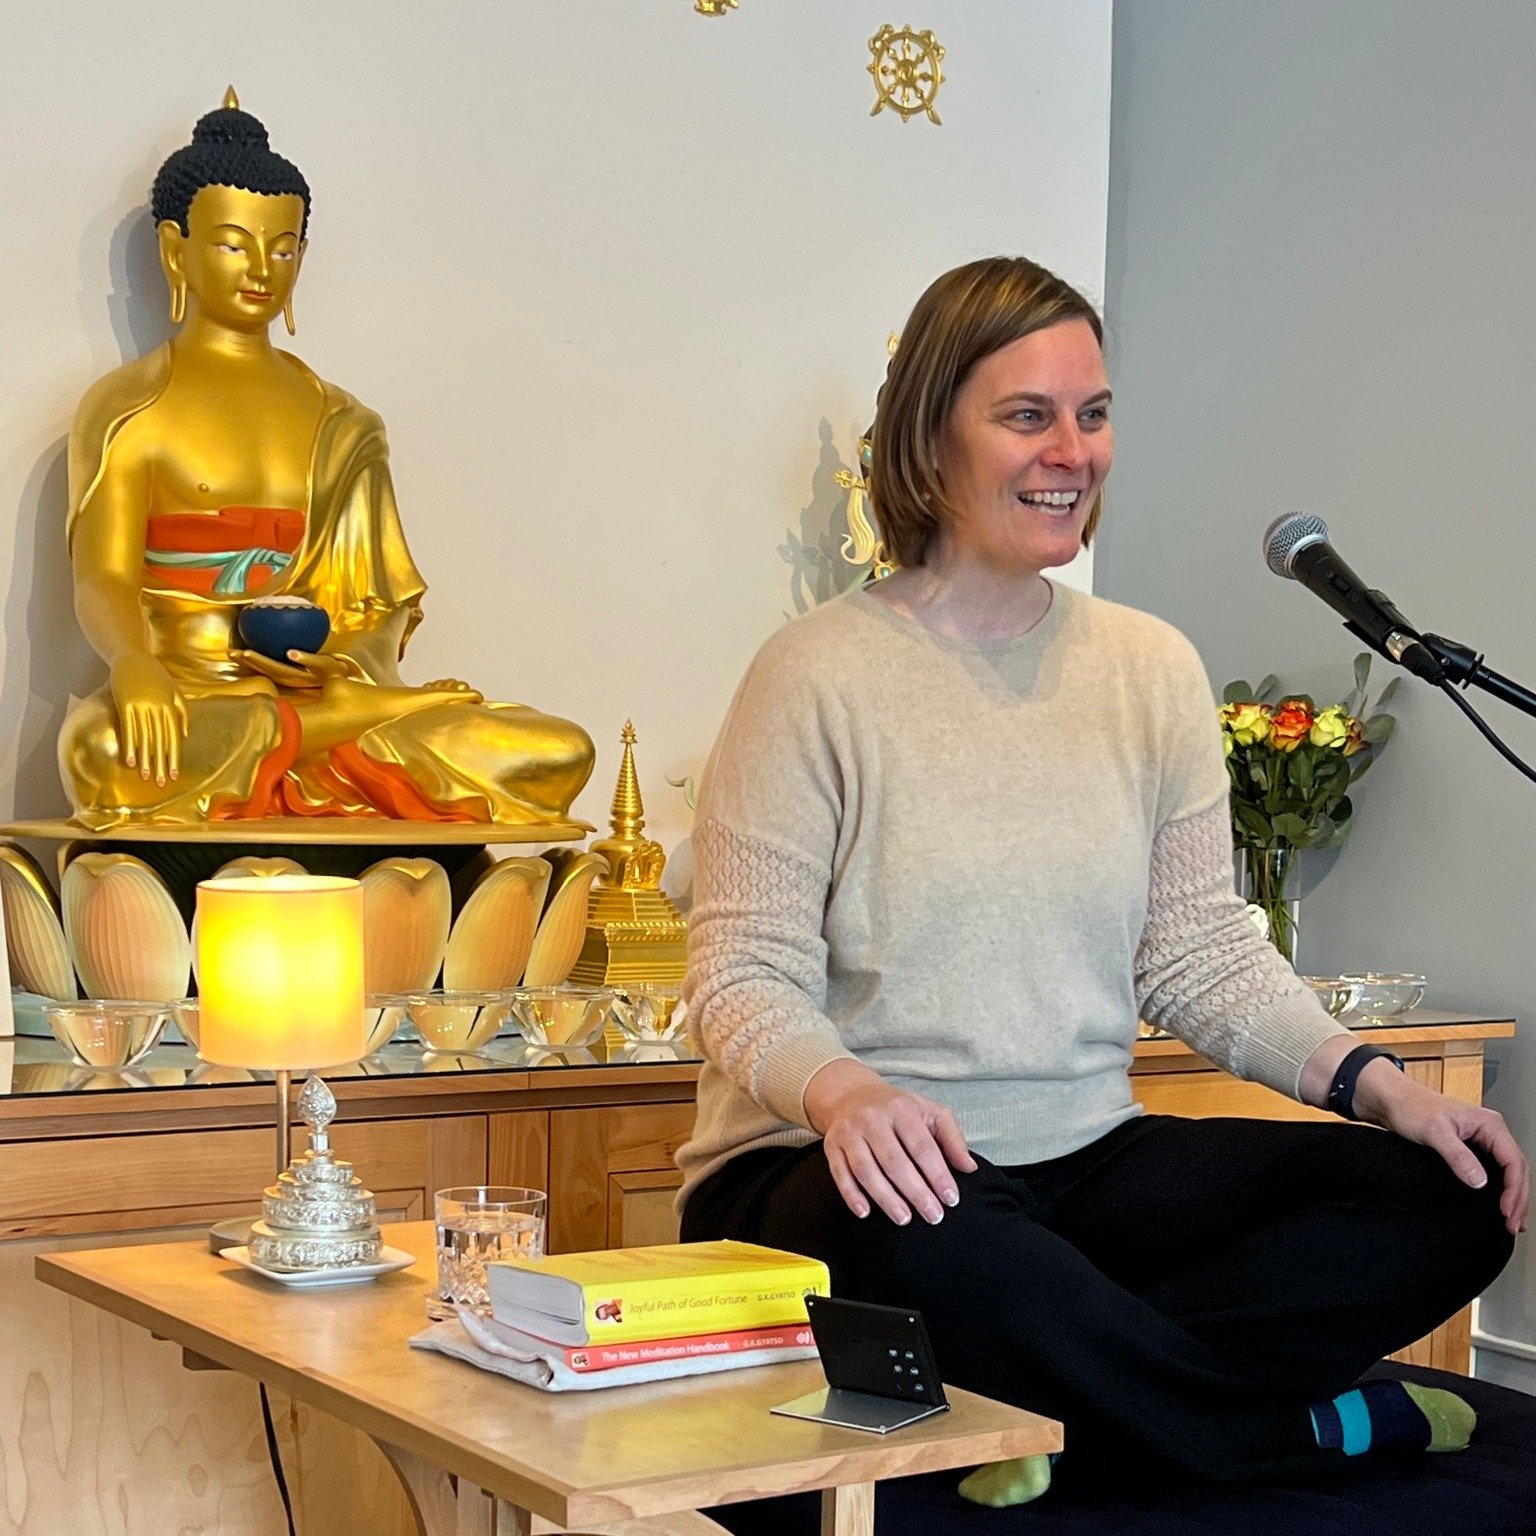 A huge thank you to Sarah Frew for coming up from KMC Philadelphia to teach and spend some time with the Sangha here in Boston. Here are some pics. If you are ever in Philadelphia check out their amazing center in the Old City.

https://www.meditatio